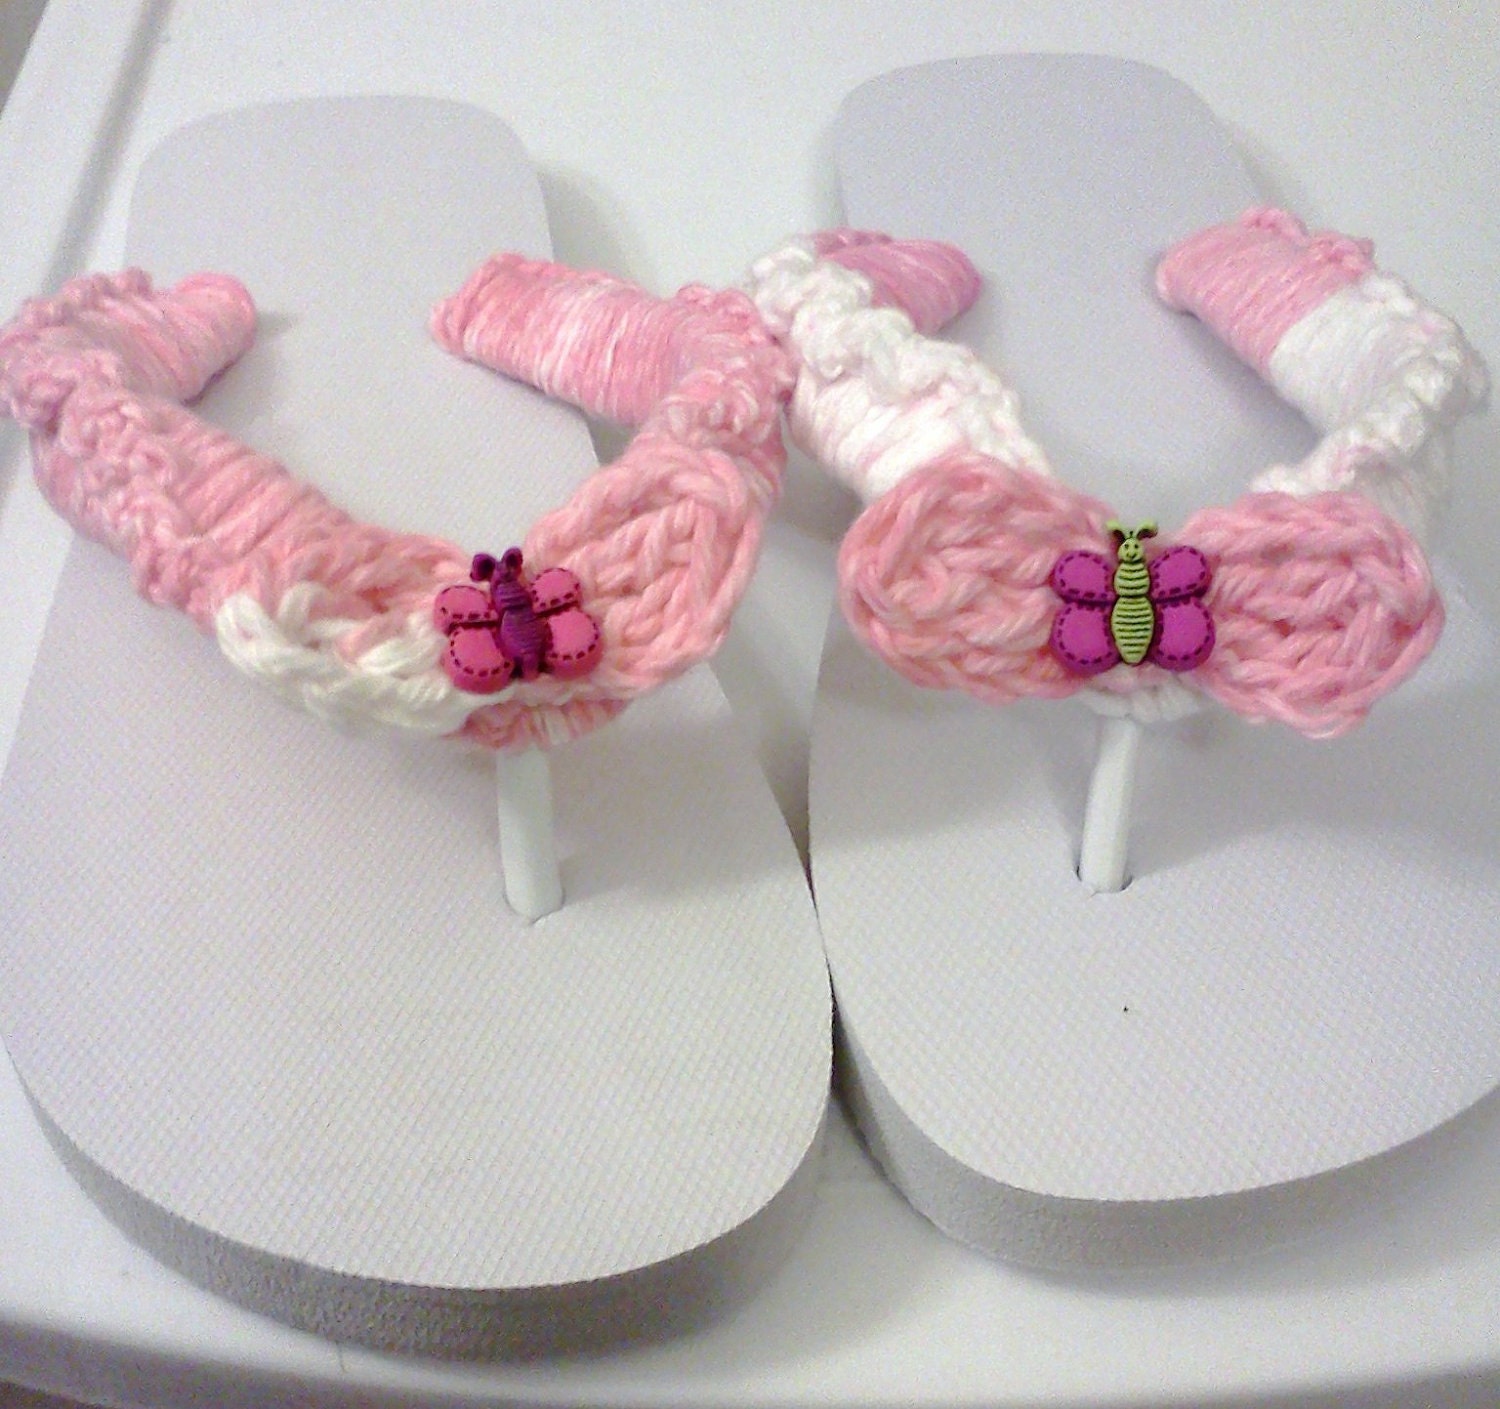 Ladies Flip Flops.......in Pink and white